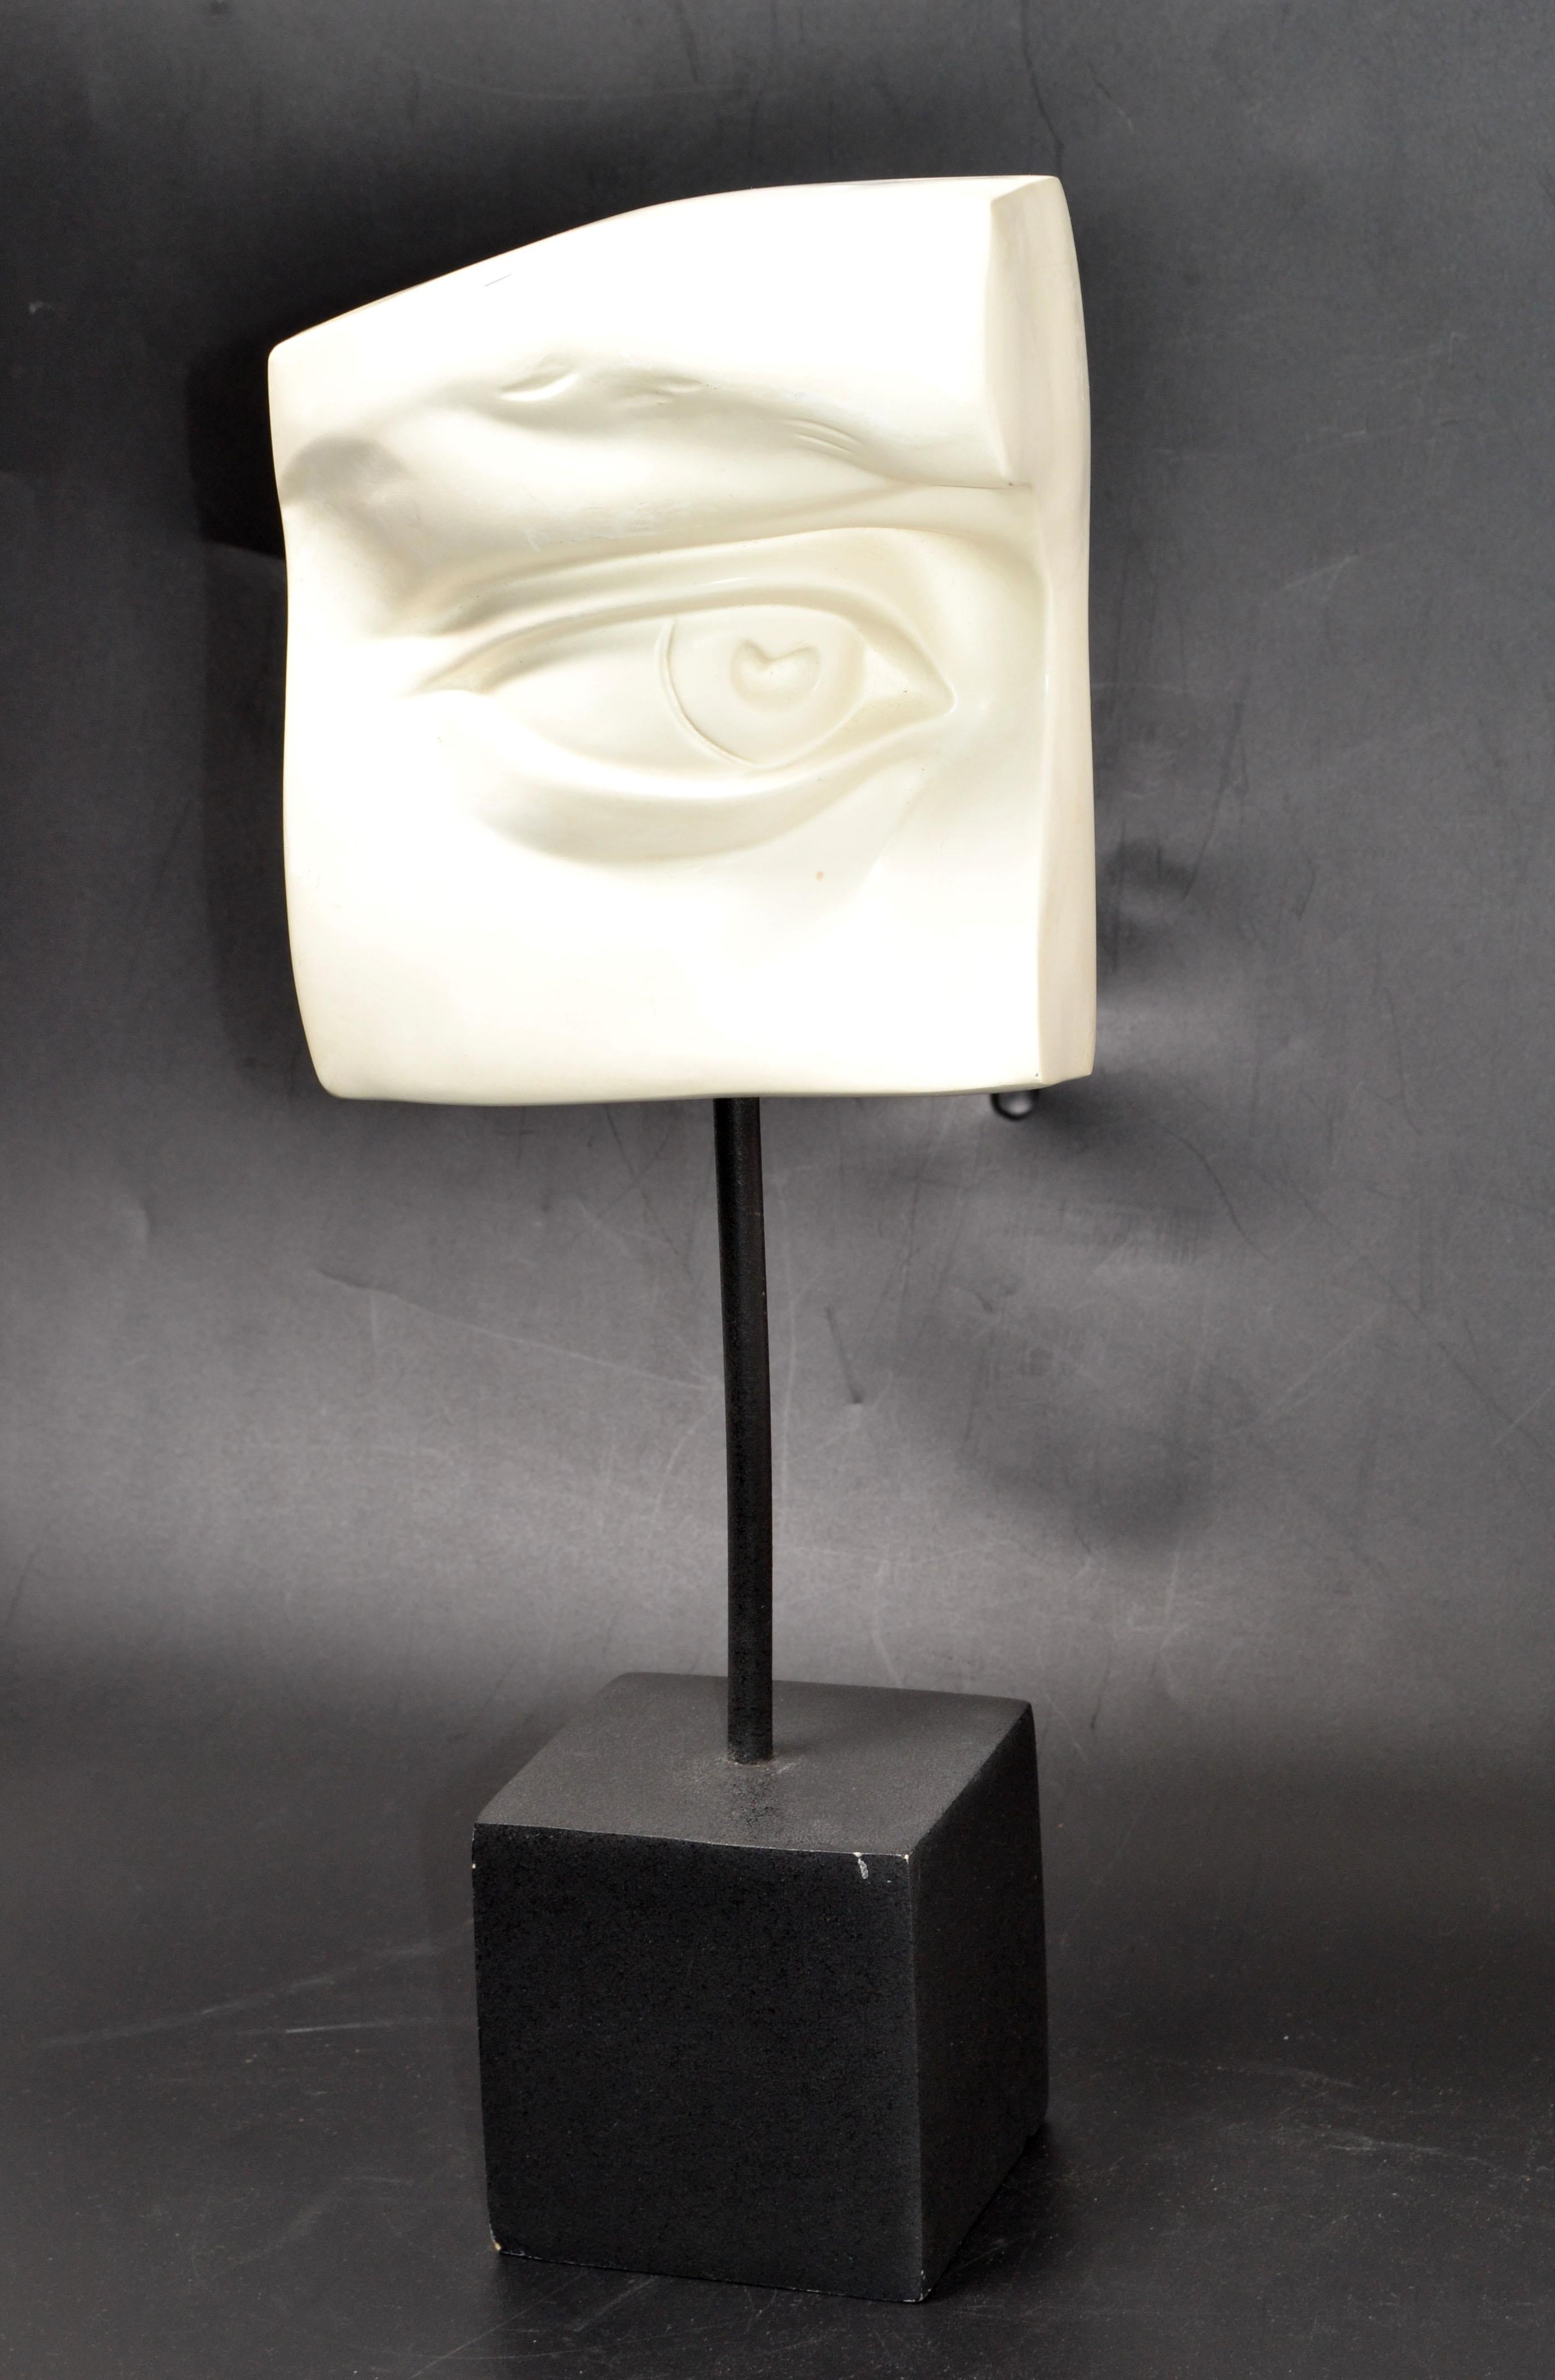 Hand-Crafted Missing Eye of David Black & White Sculpture Plaster on Wood Mid-Century Modern For Sale